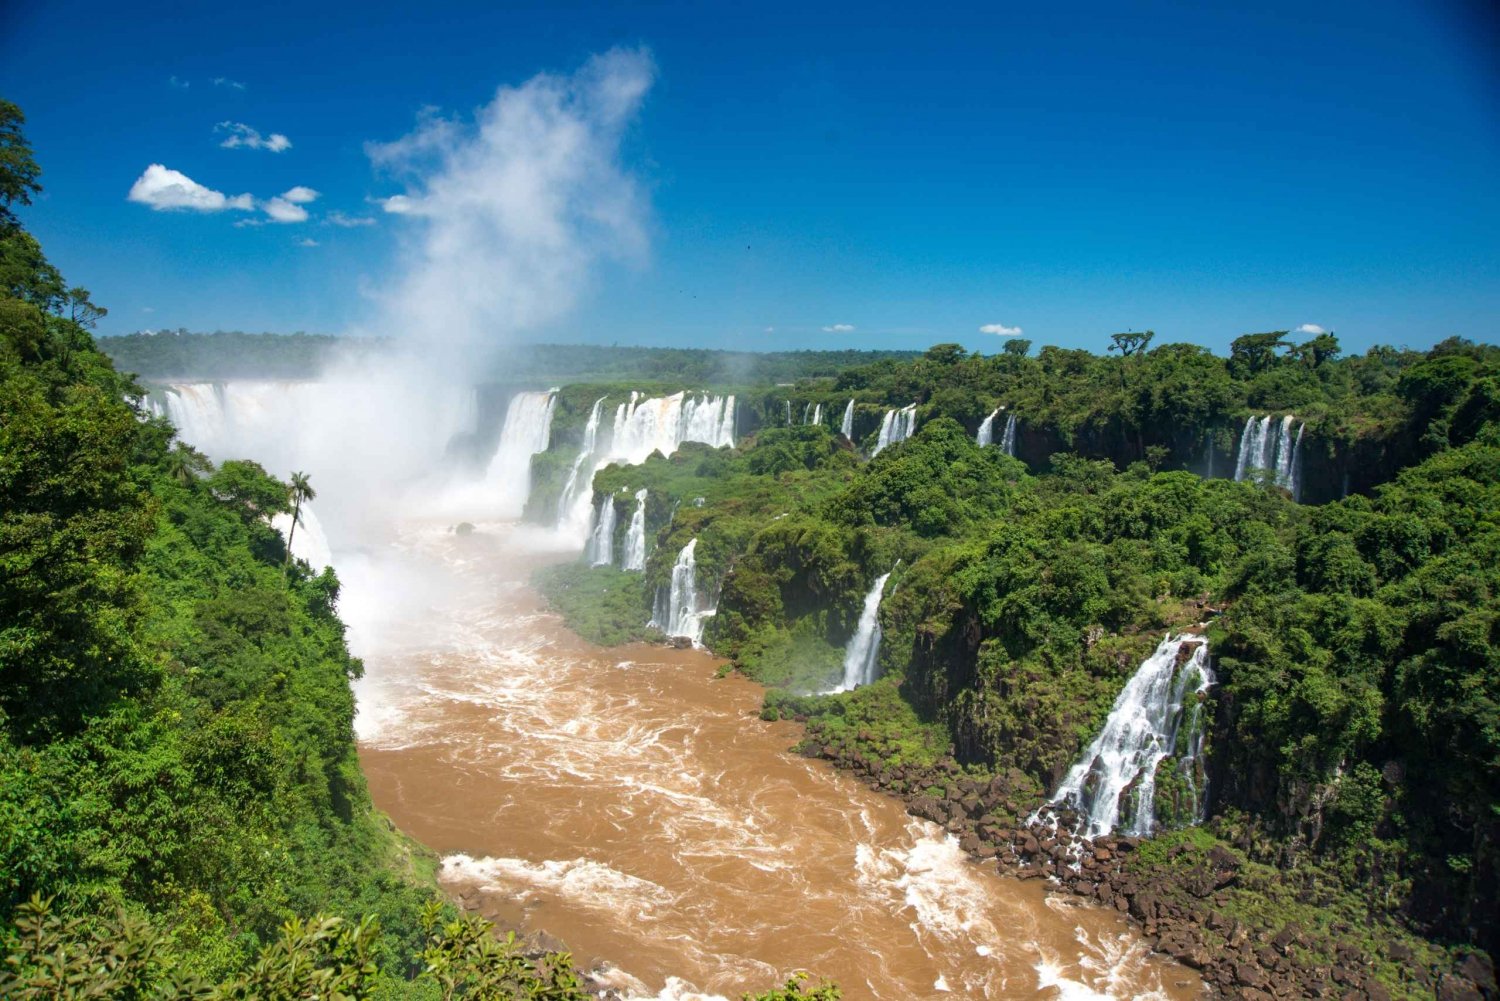 Buenos Aires: Iguazú Falls Day Trip with Flight & Boat Ride